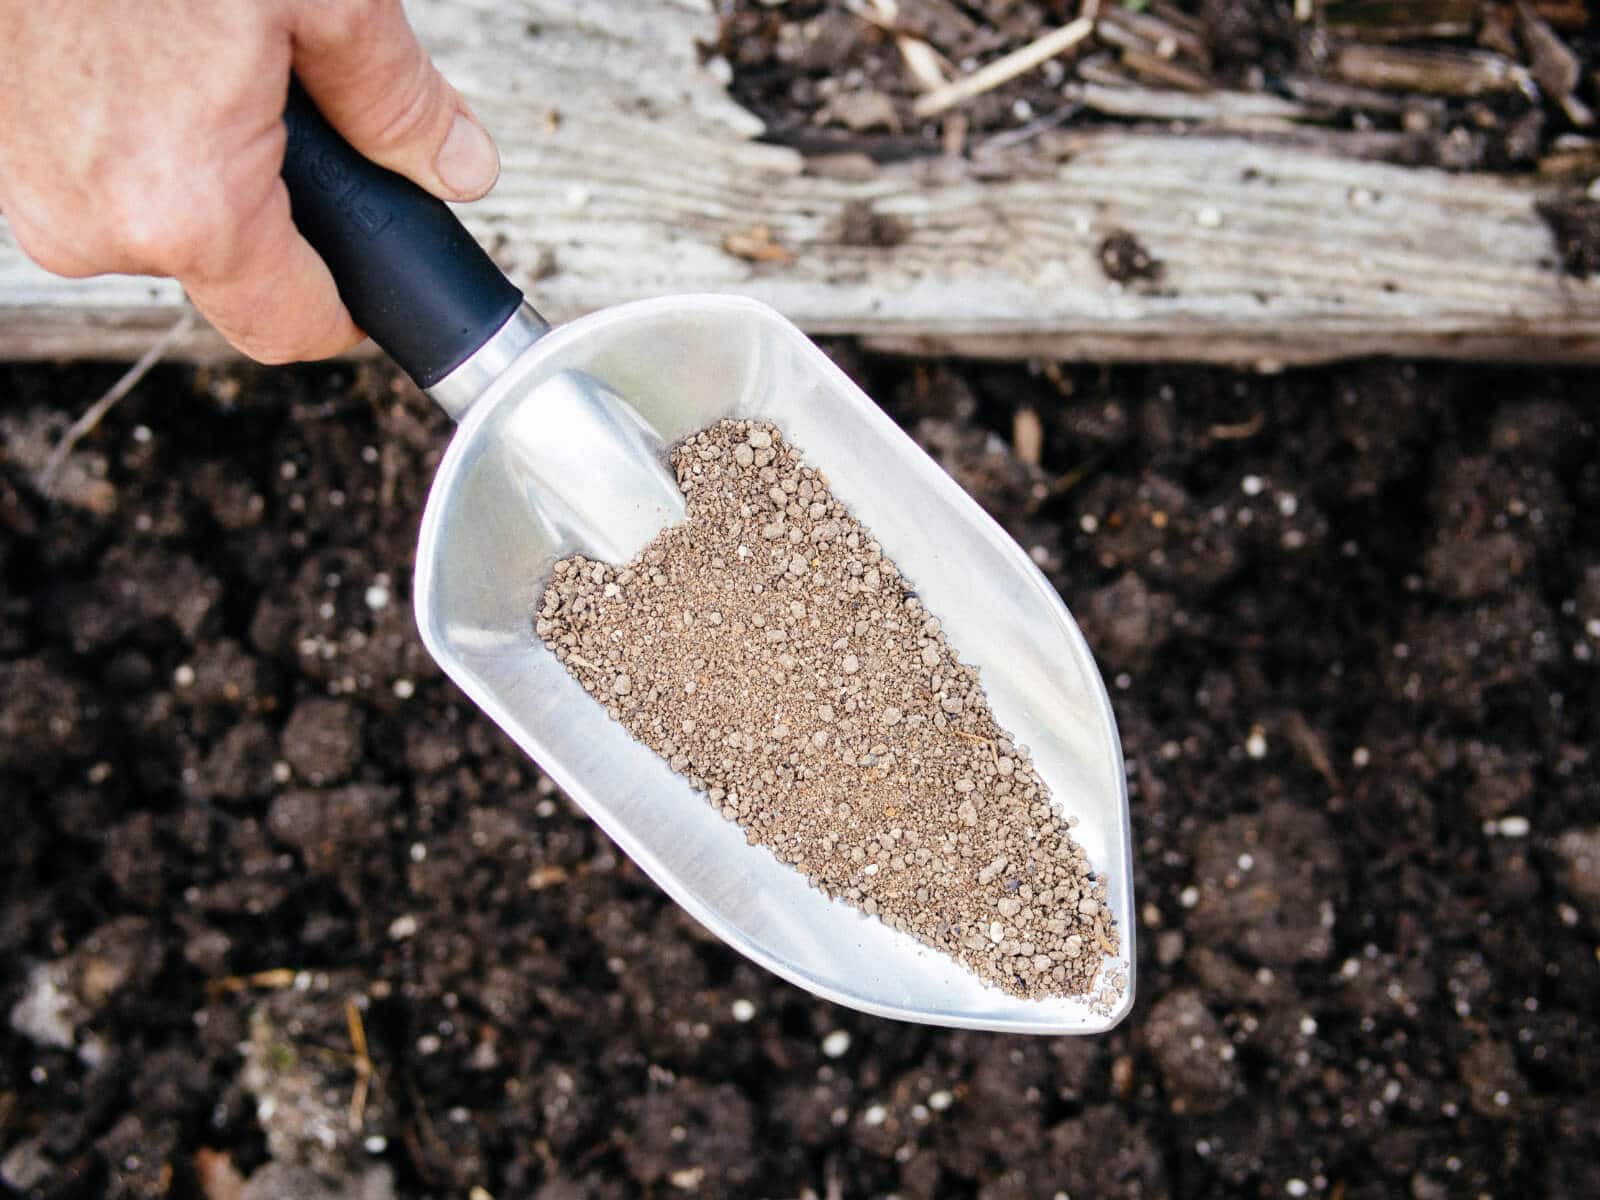 Amend your soil properly with suggestions from a soil test